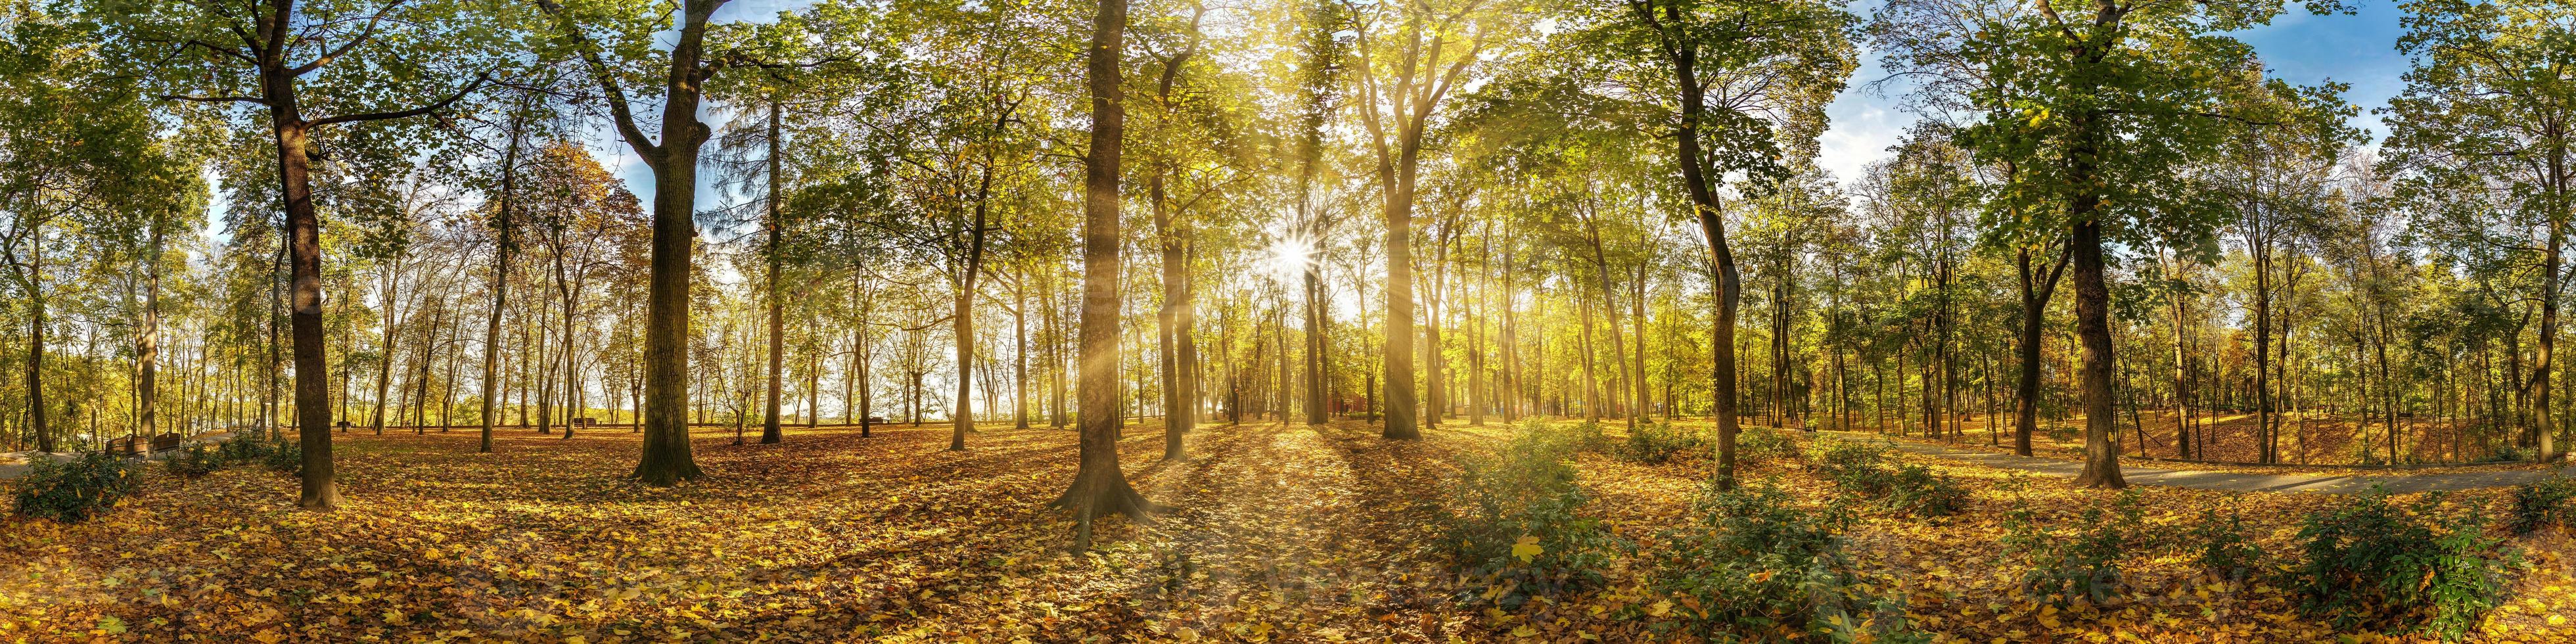 Beautiful autumn forest or park hdri panorama with bright sun shining through the trees. scenic landscape with pleasant warm sunshine photo